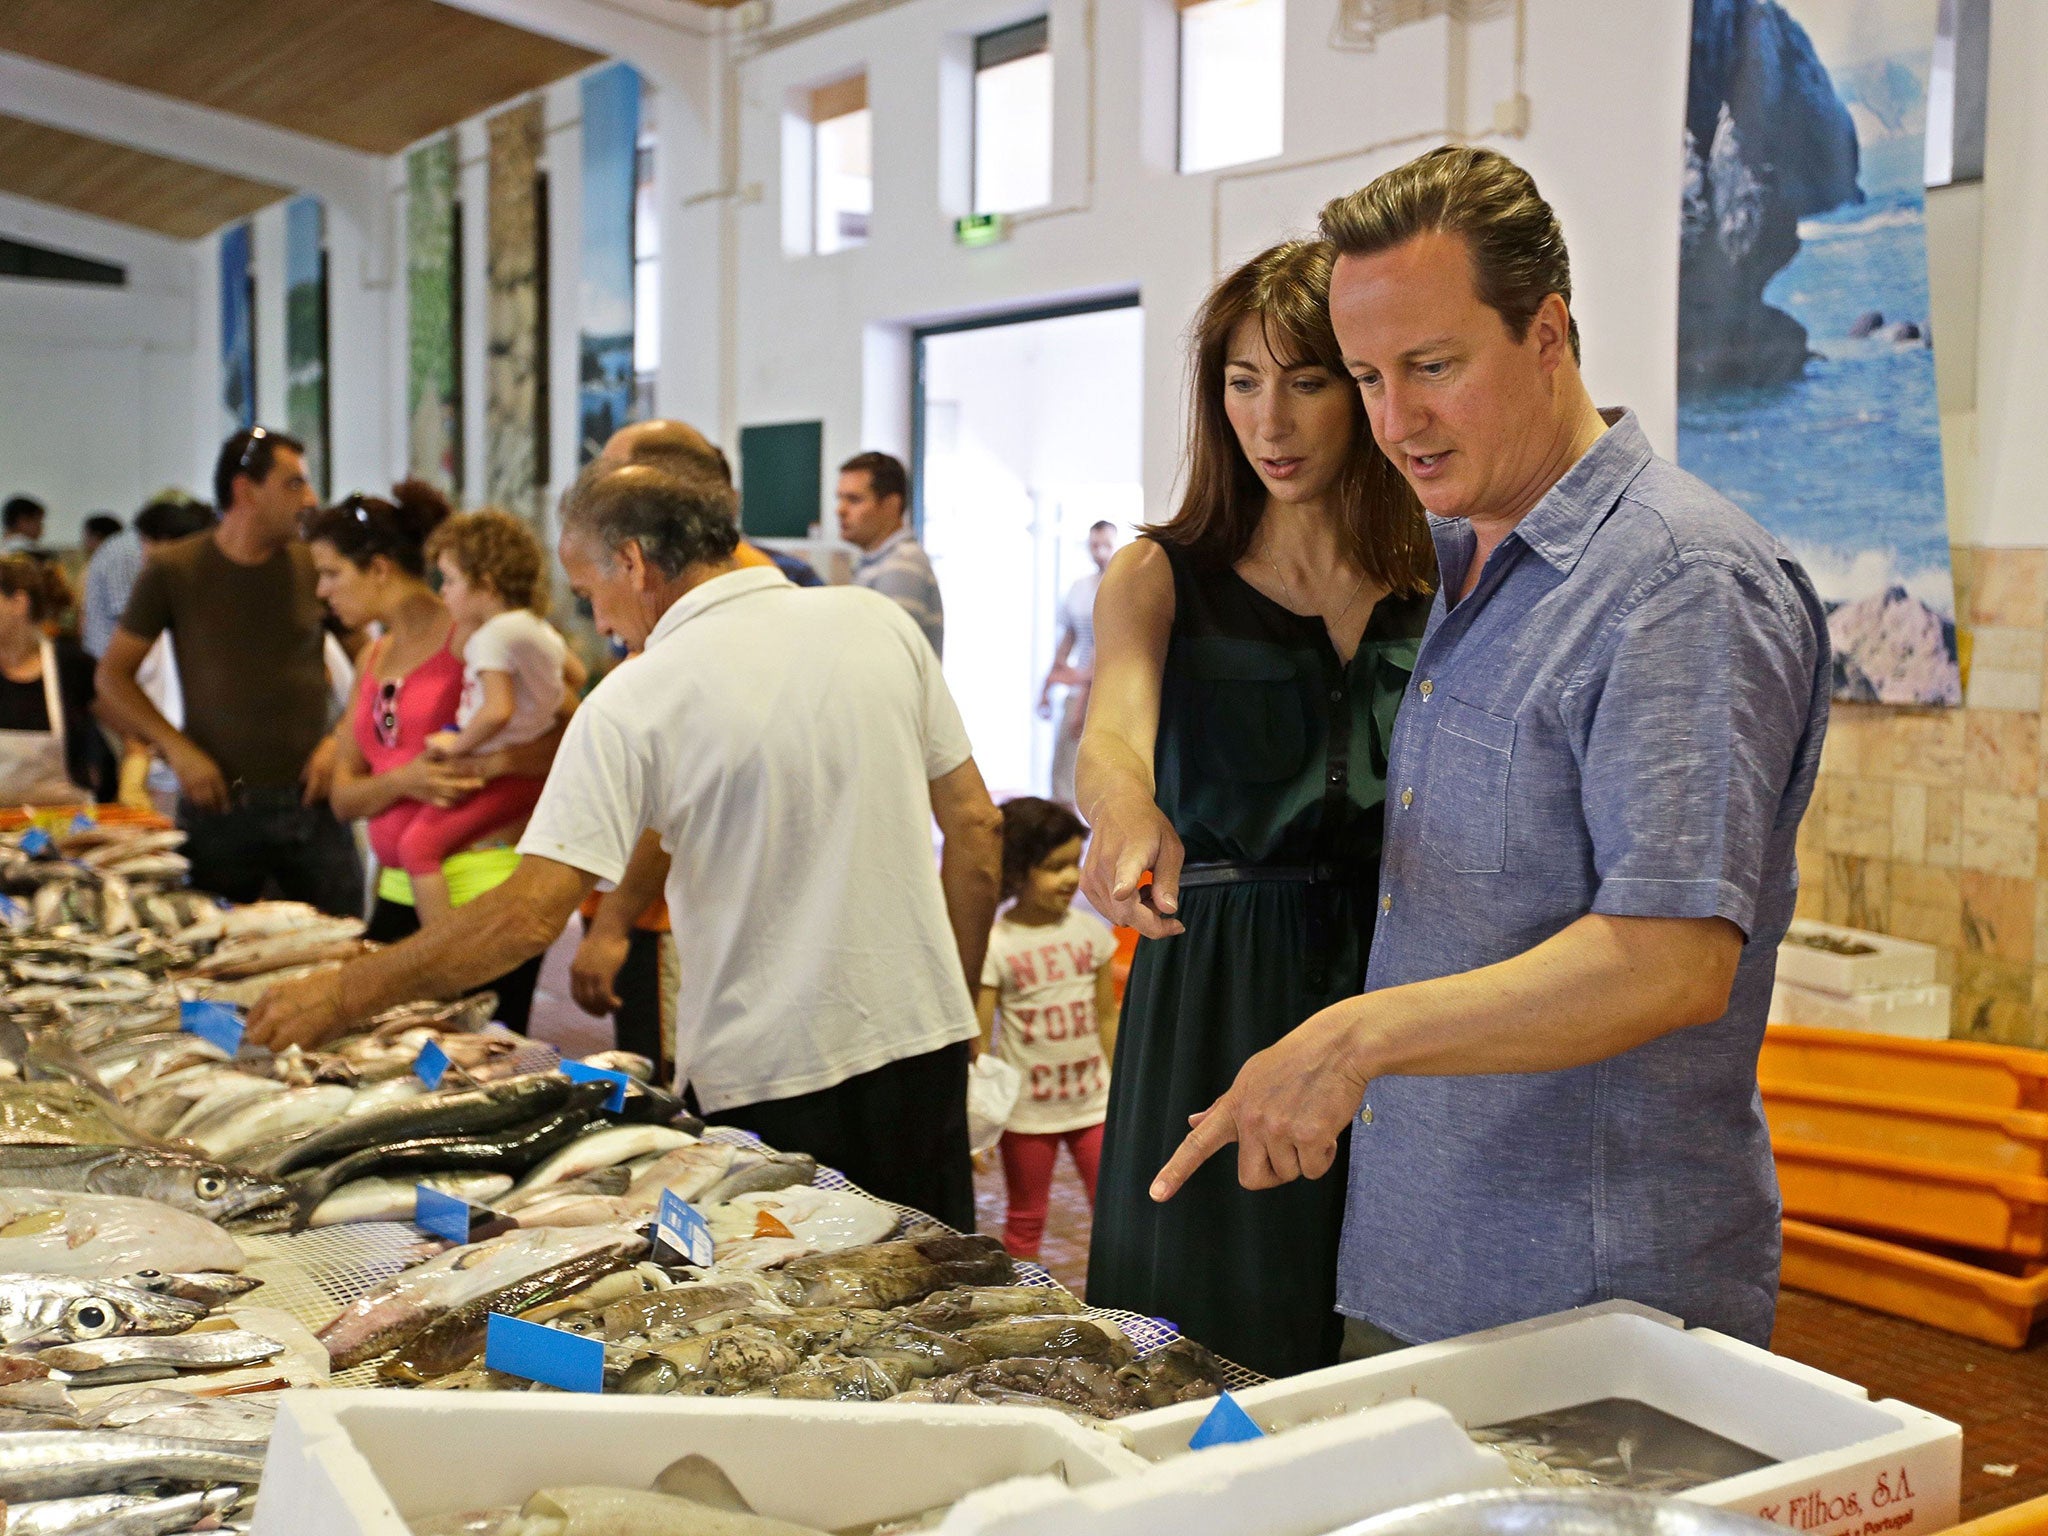 After his holiday in Portugal, David Cameron’s summer has been dominated by controversy